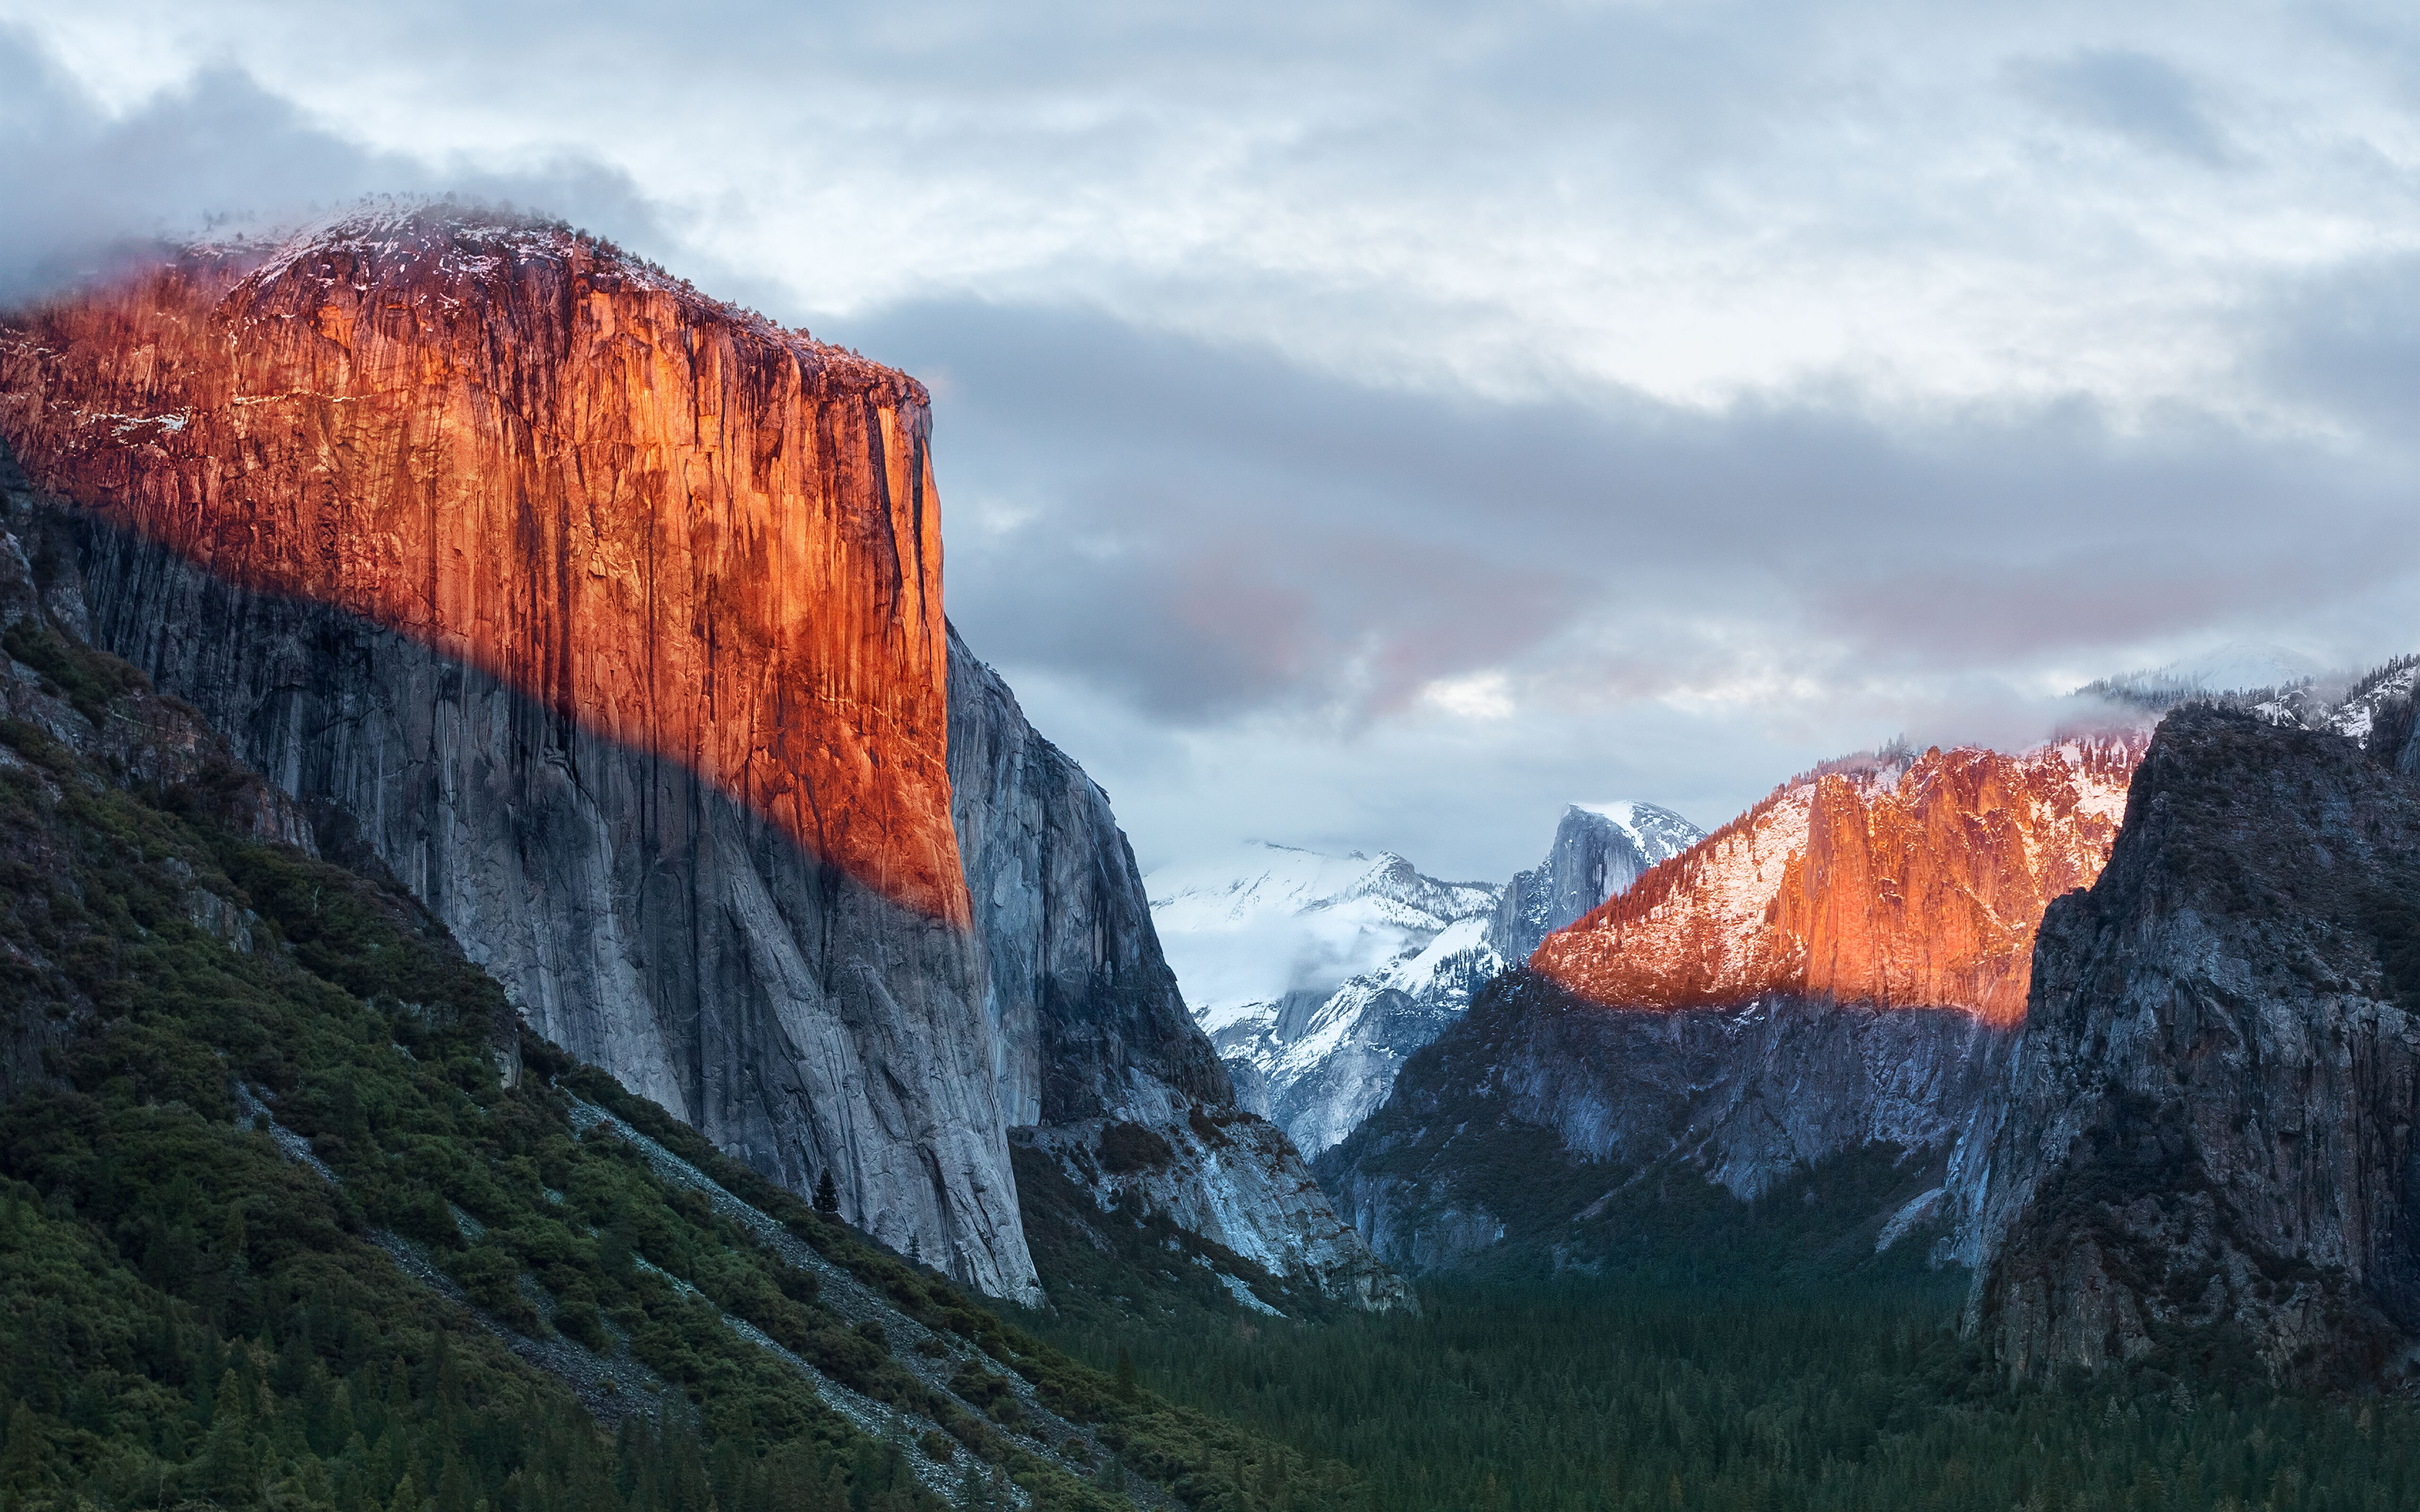 os x yosemite wallpaper 4k with an x on it